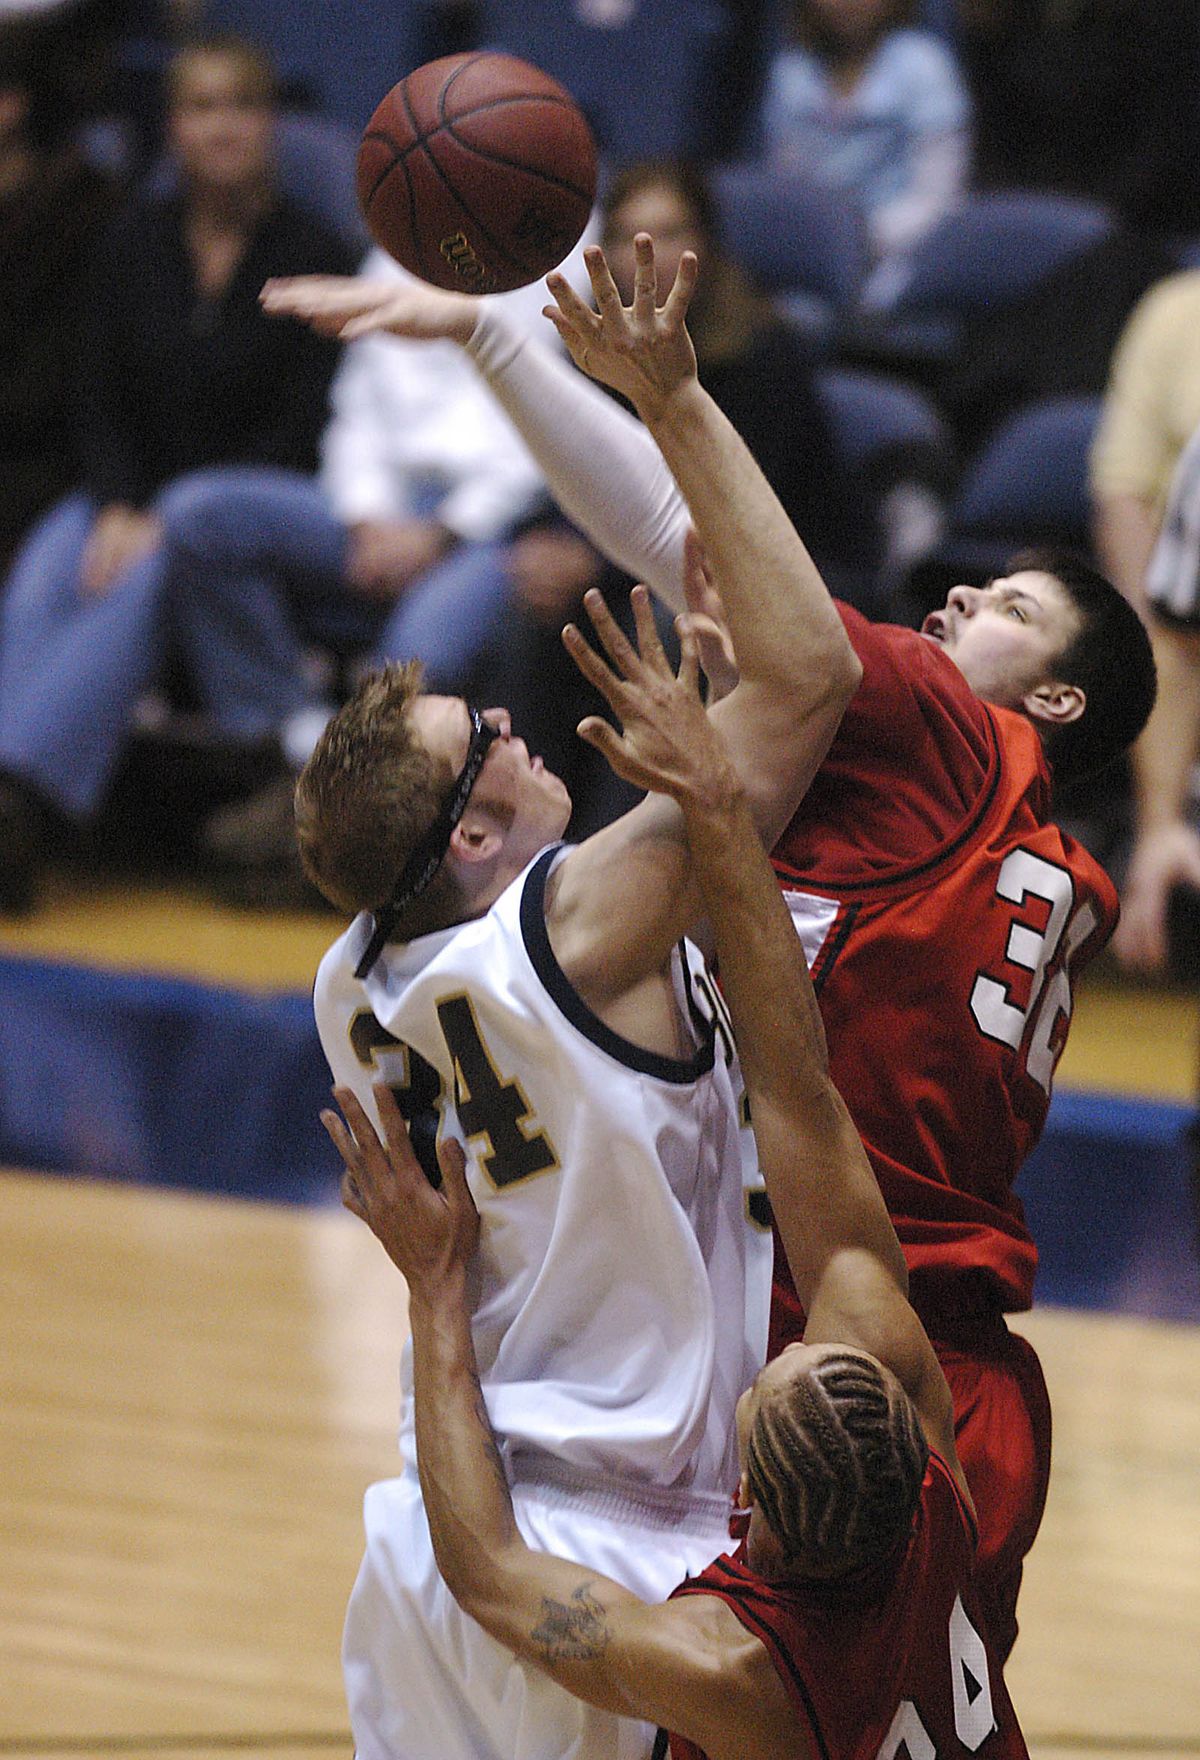 Jake Beitinger, right, deflects a shot for Eastern in a loss to Montana State in 2006. (File Associated Press / The Spokesman-Review)